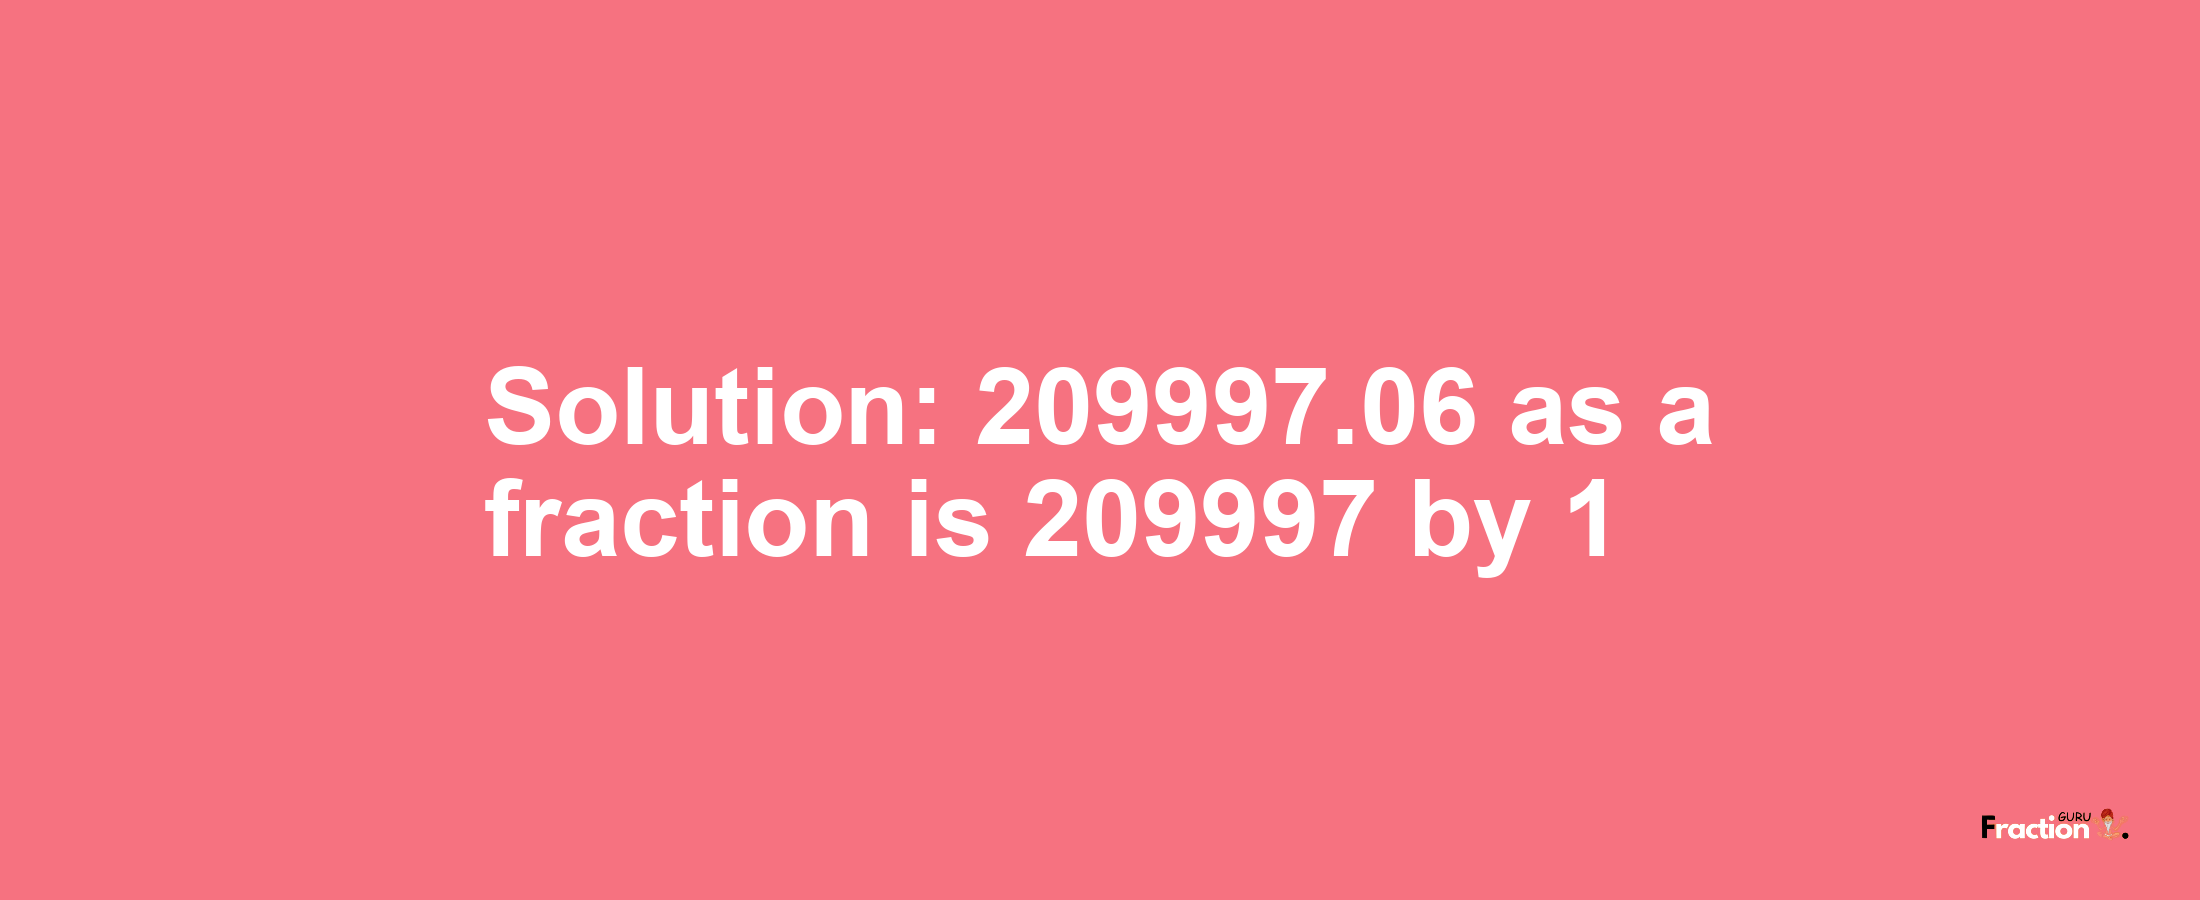 Solution:209997.06 as a fraction is 209997/1